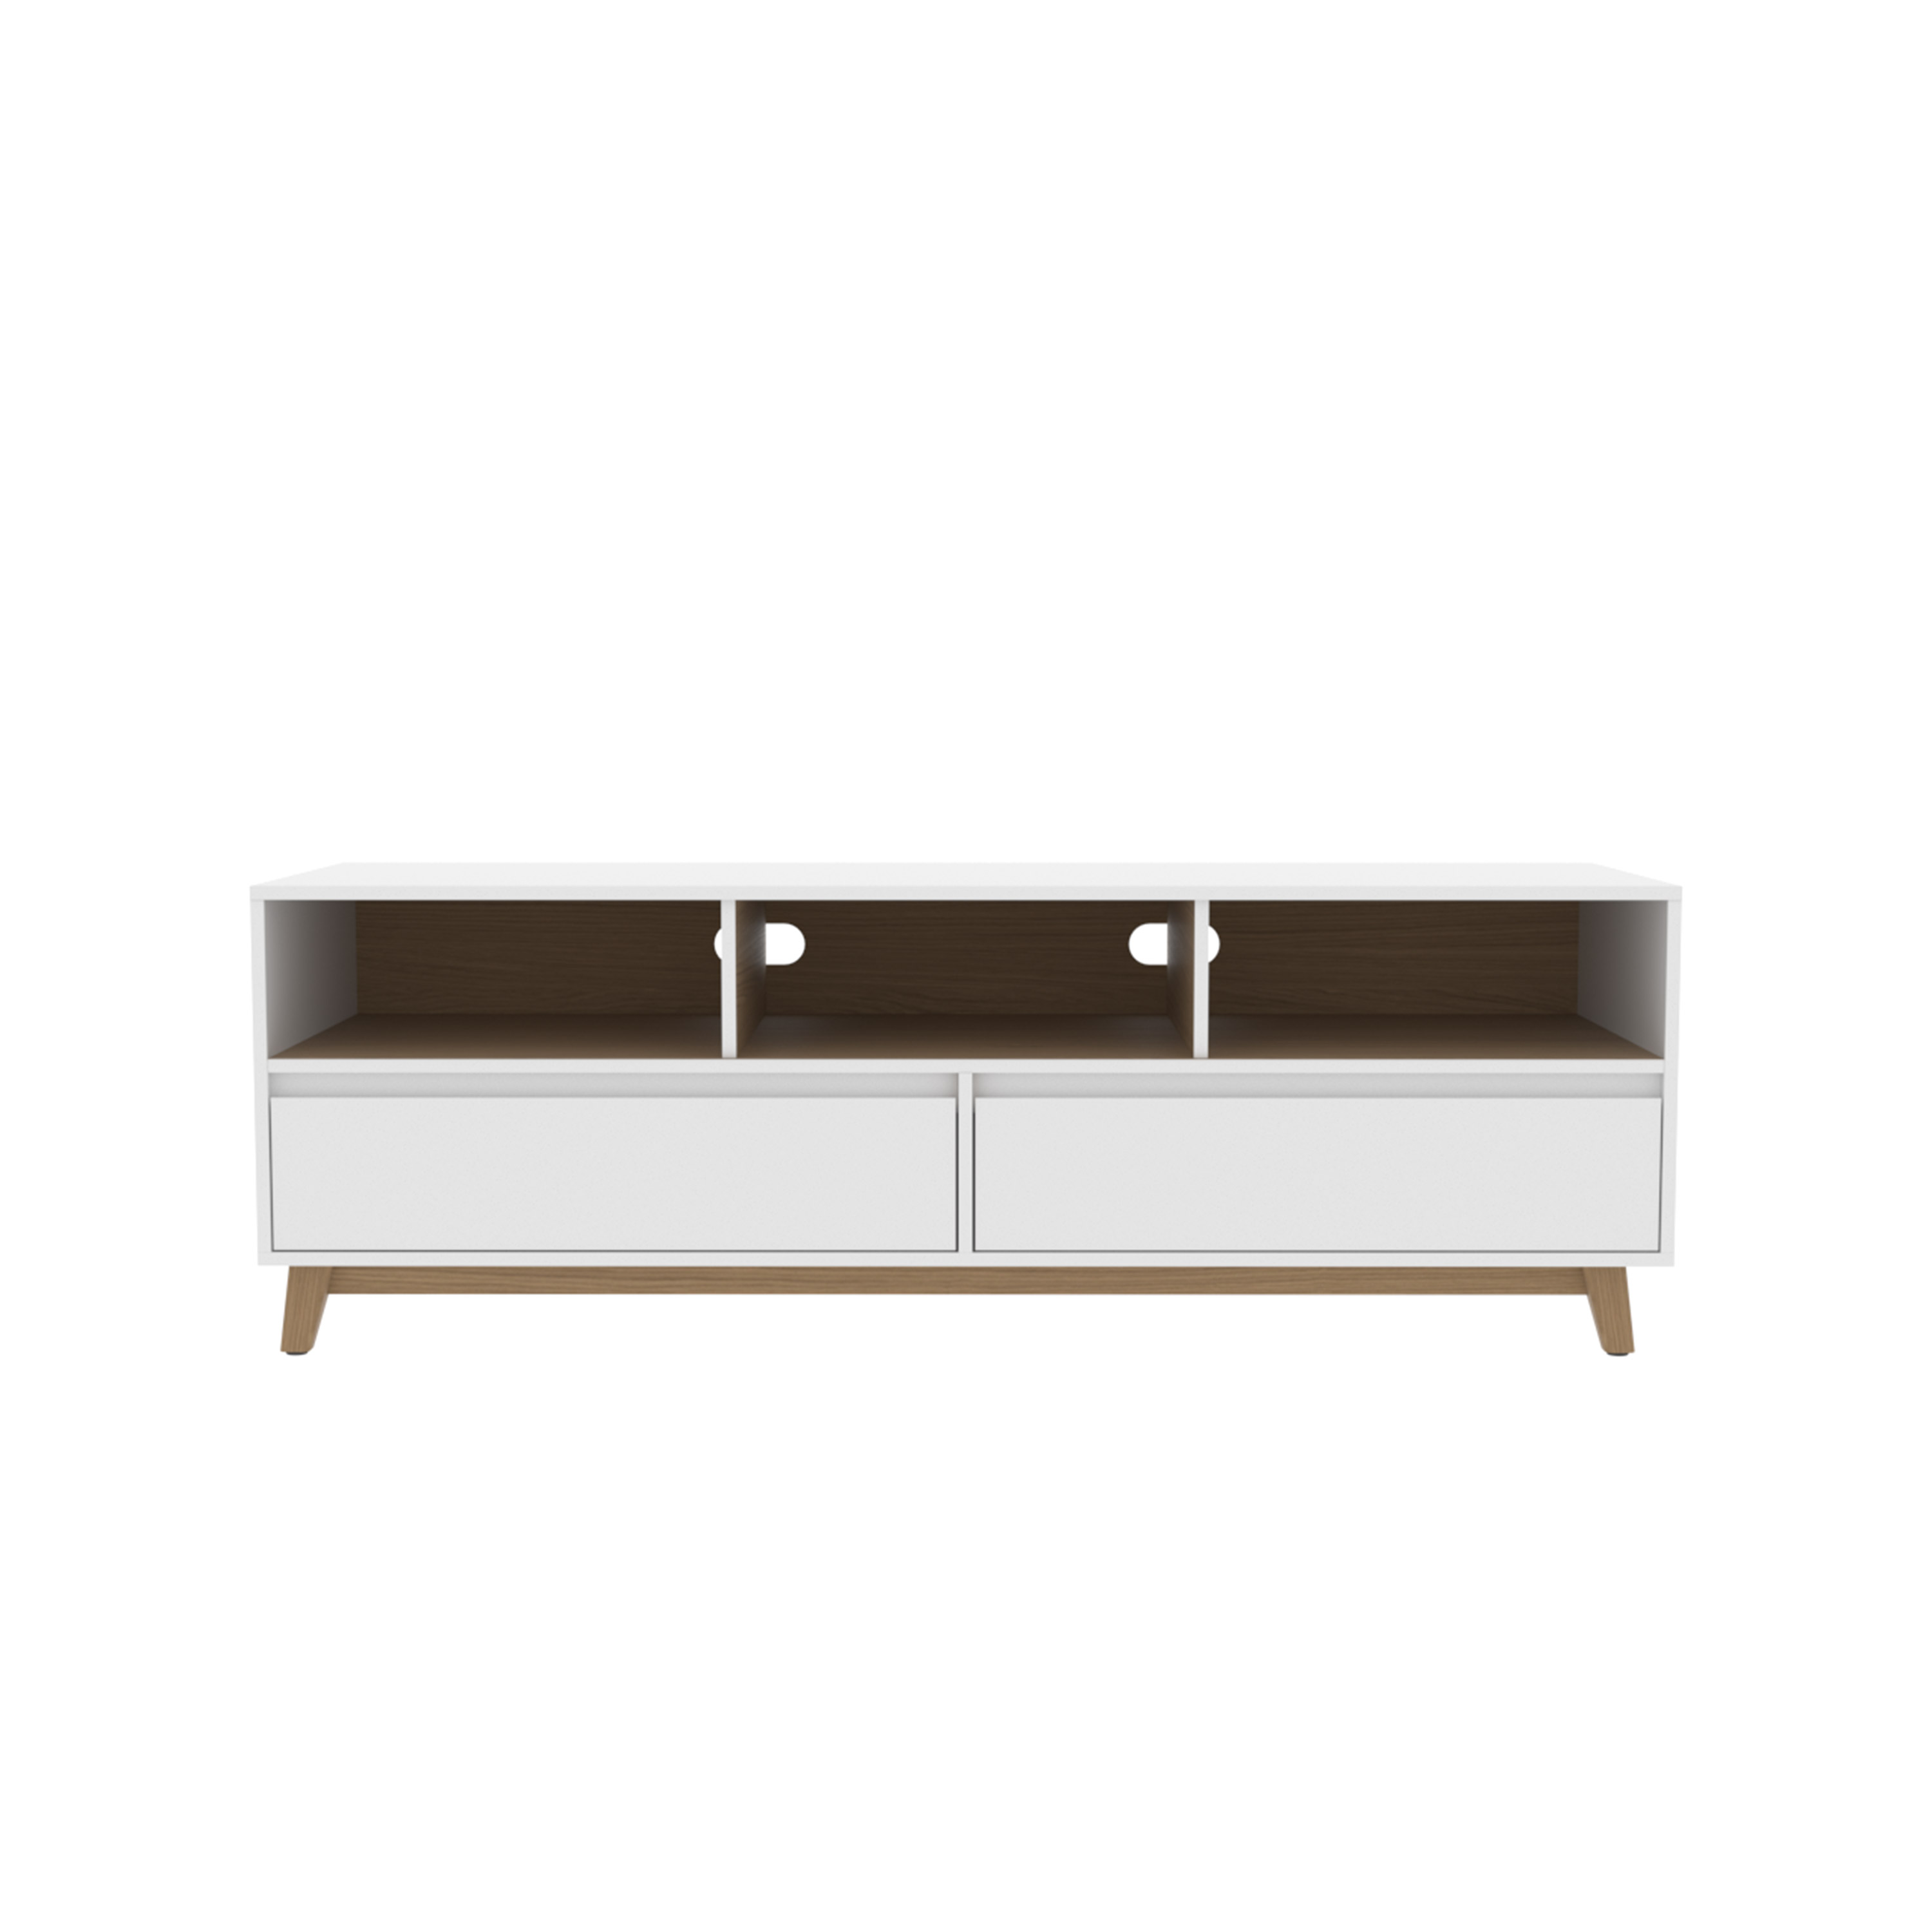 Mainstays Mid-Century TV Stand for TVs up to 70", White Finish - image 7 of 8